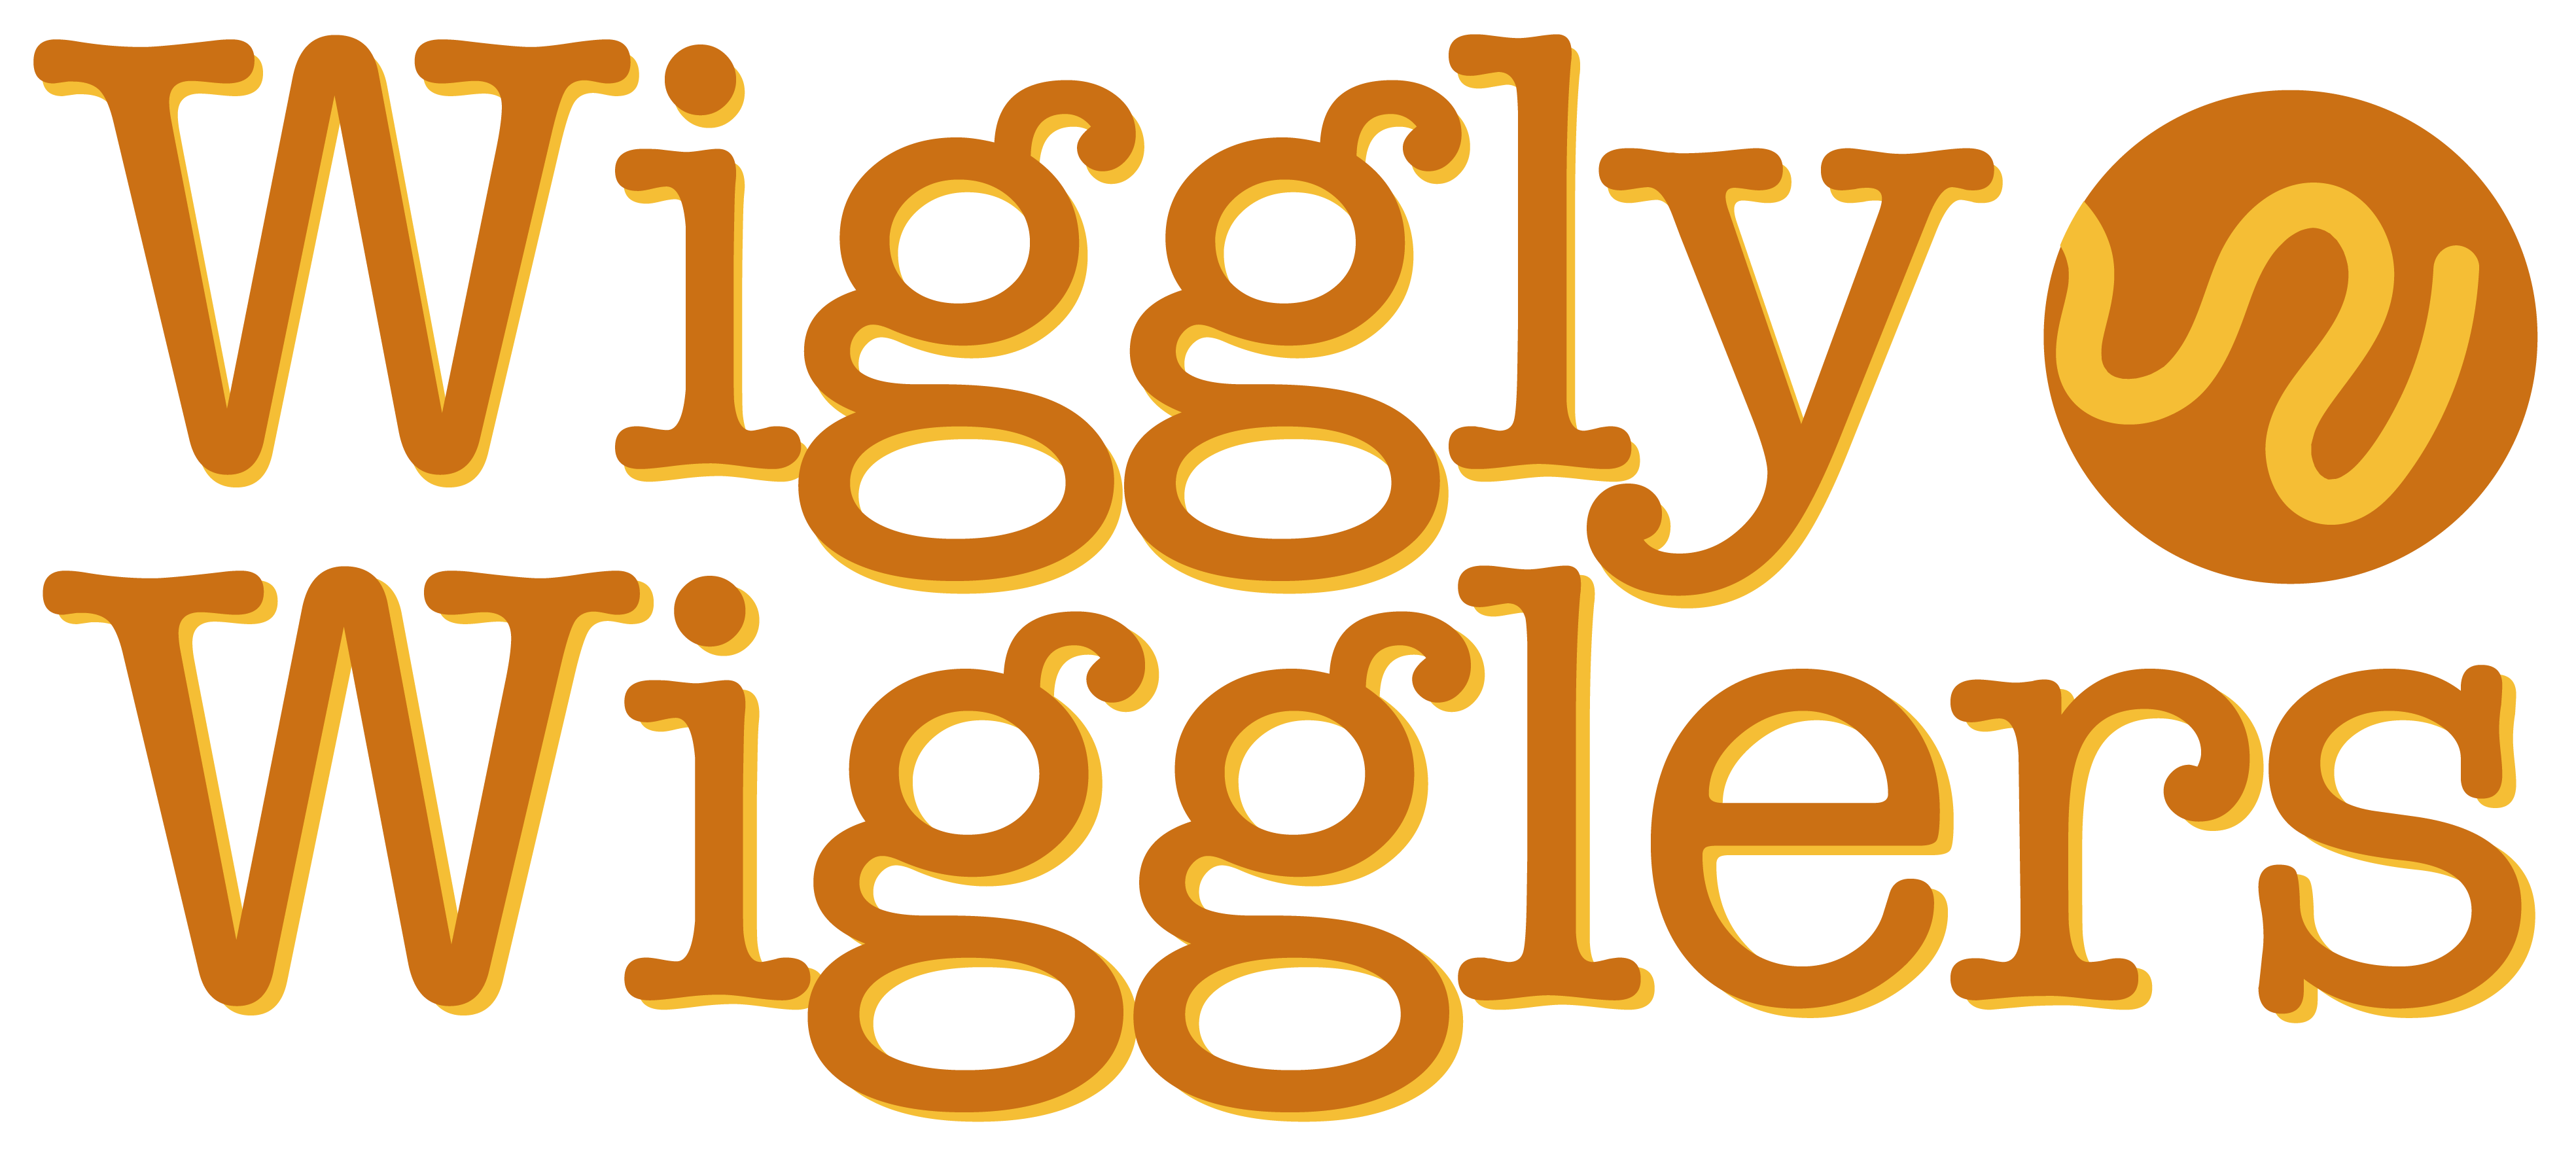 Wiggly Wigglers - Bringing Country Living to Life